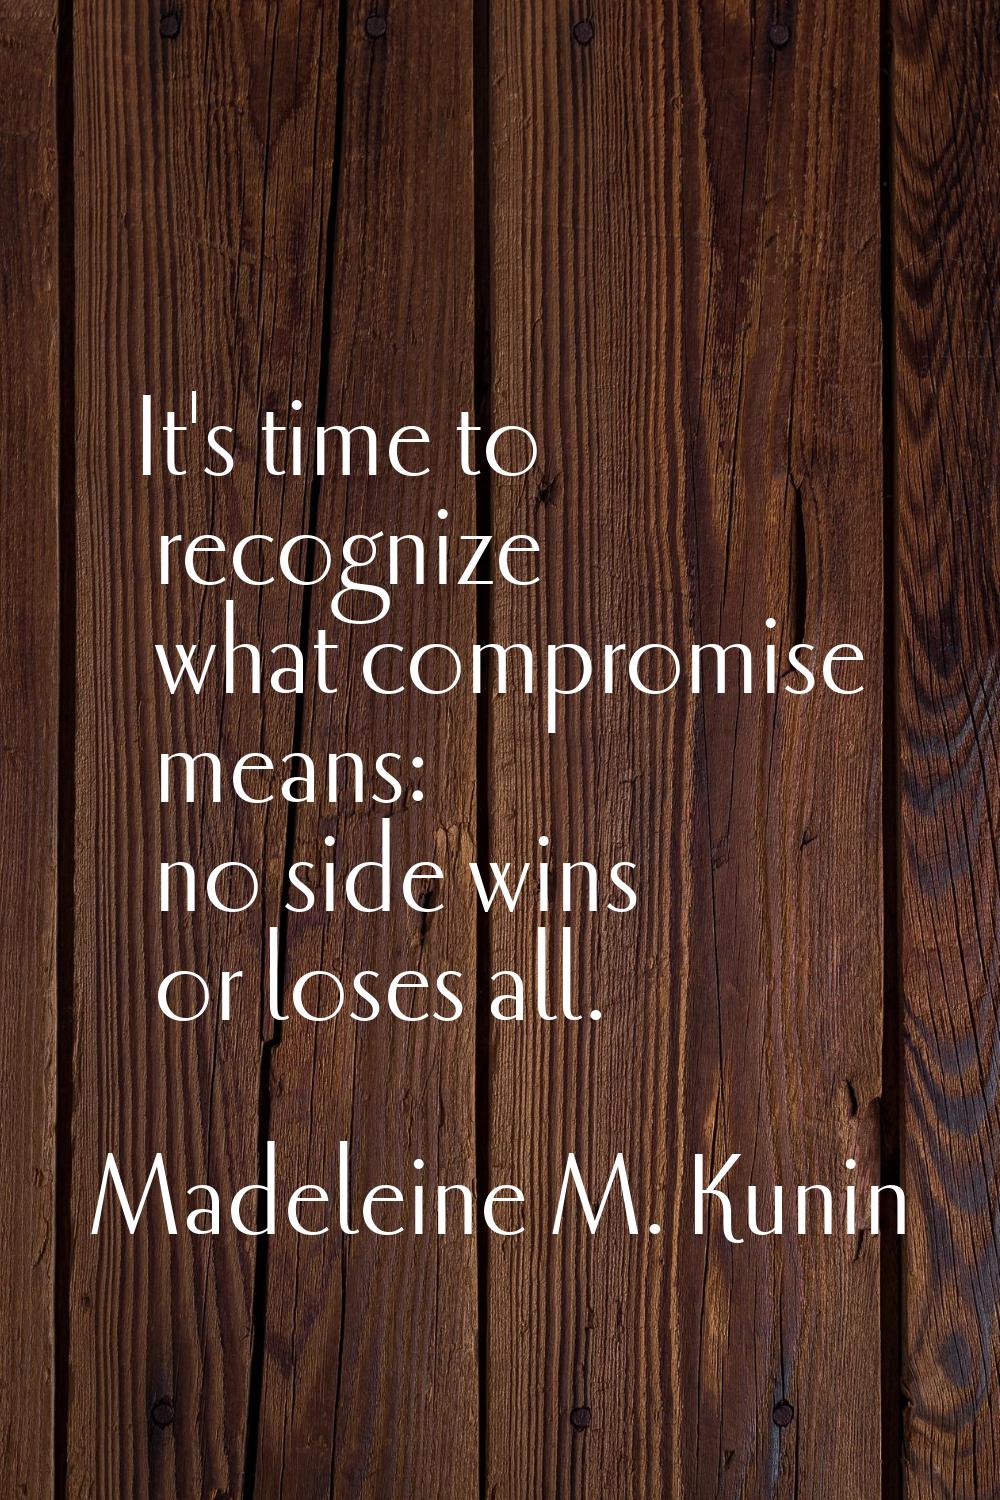 It's time to recognize what compromise means: no side wins or loses all.